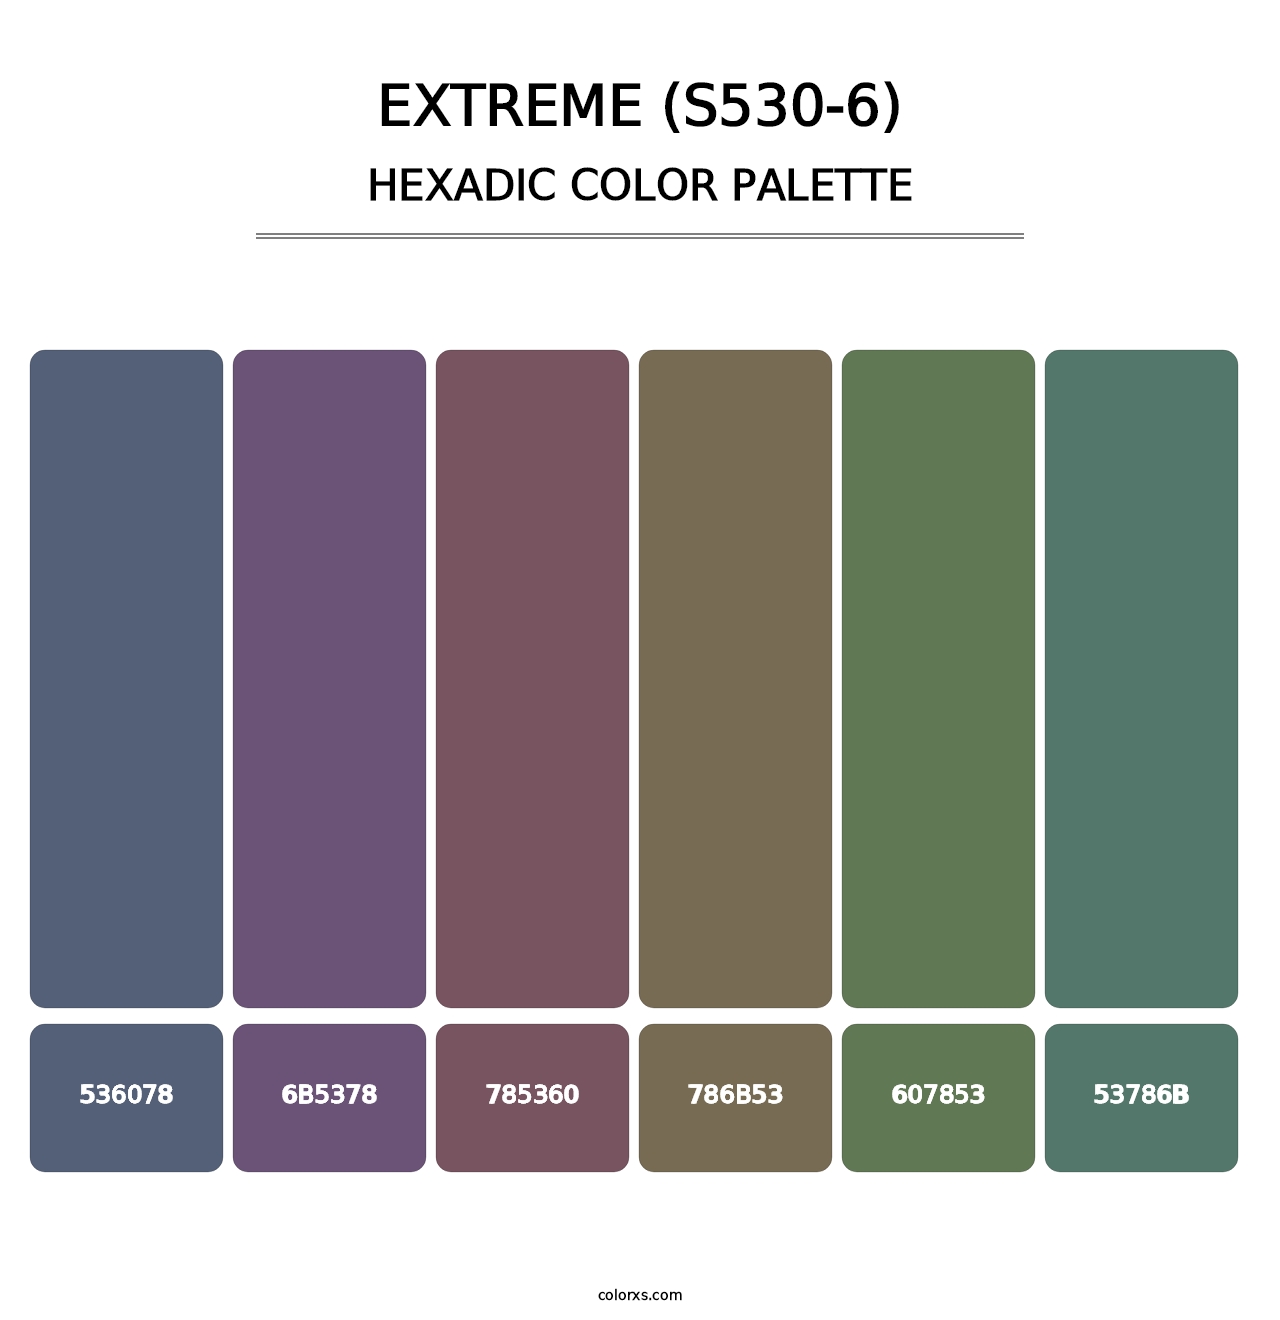 Extreme (S530-6) - Hexadic Color Palette